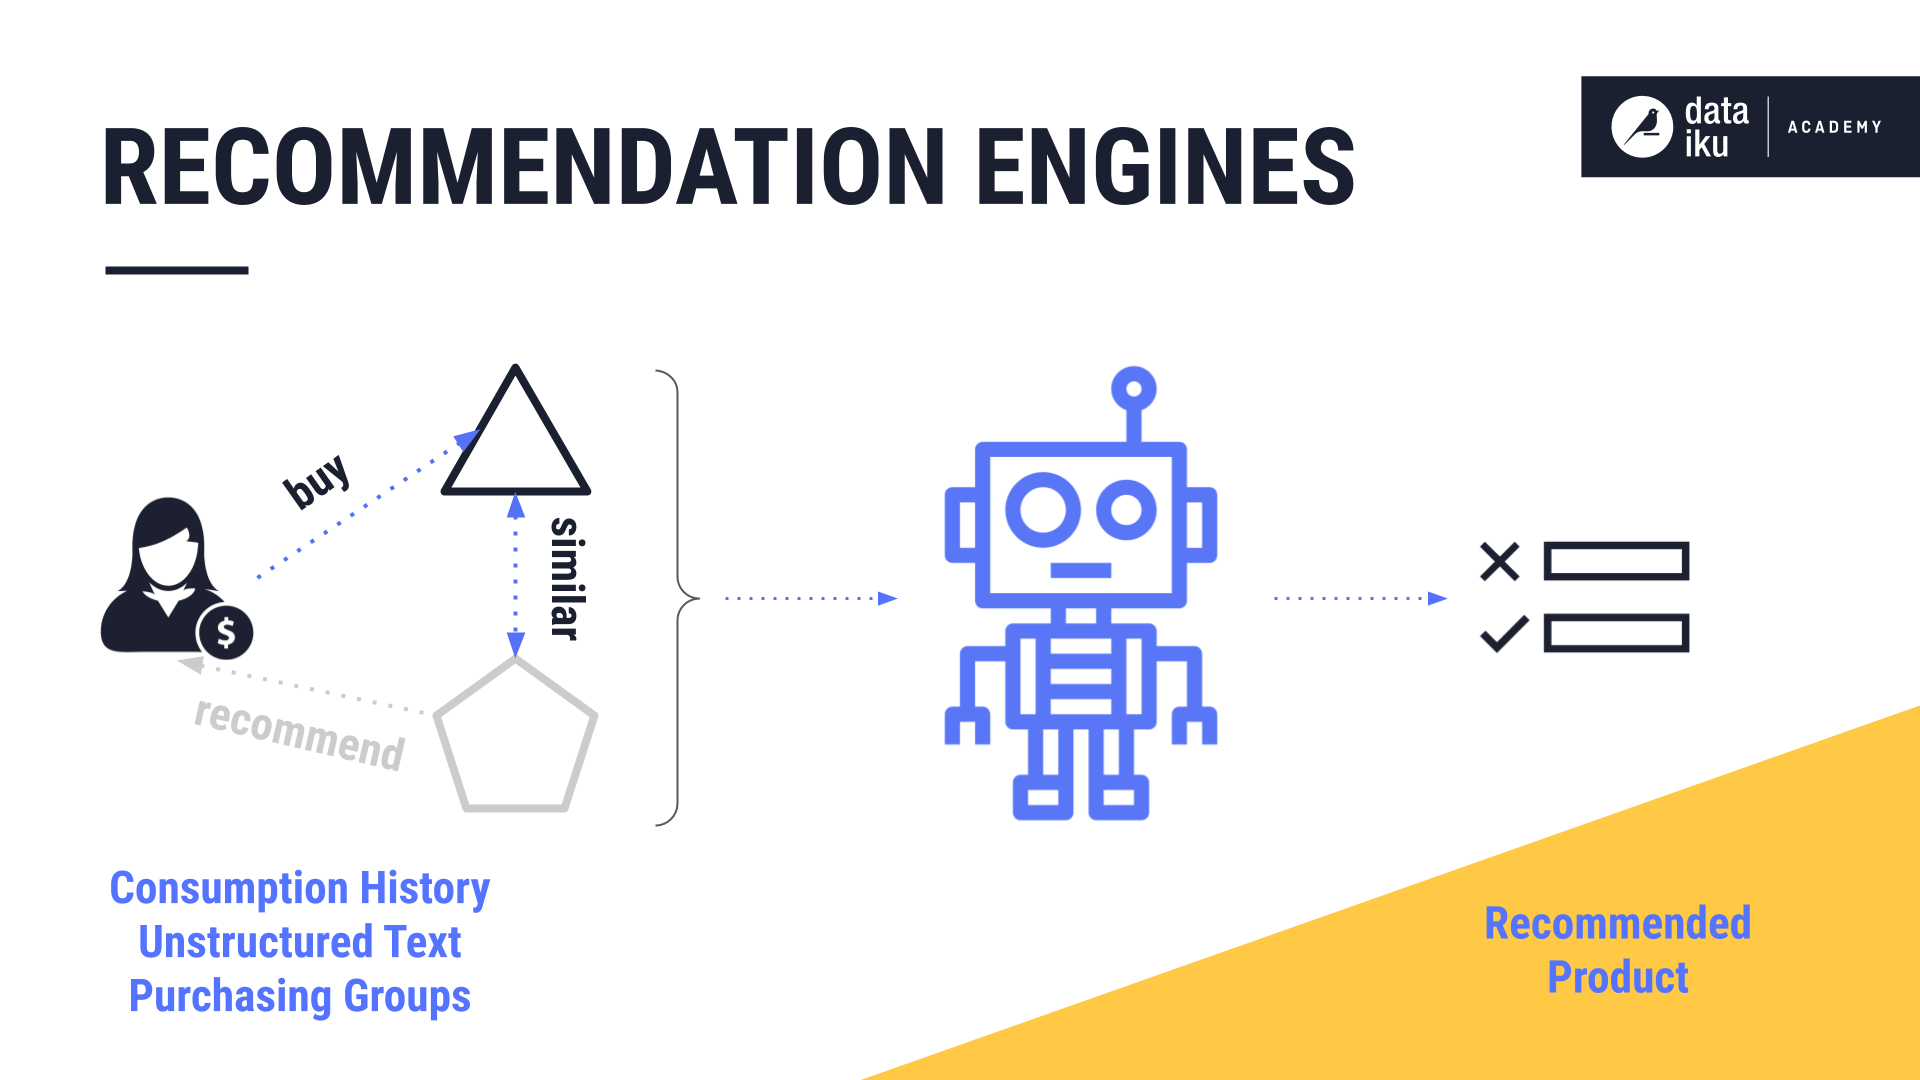 ../../../_images/recommendation-engines.png